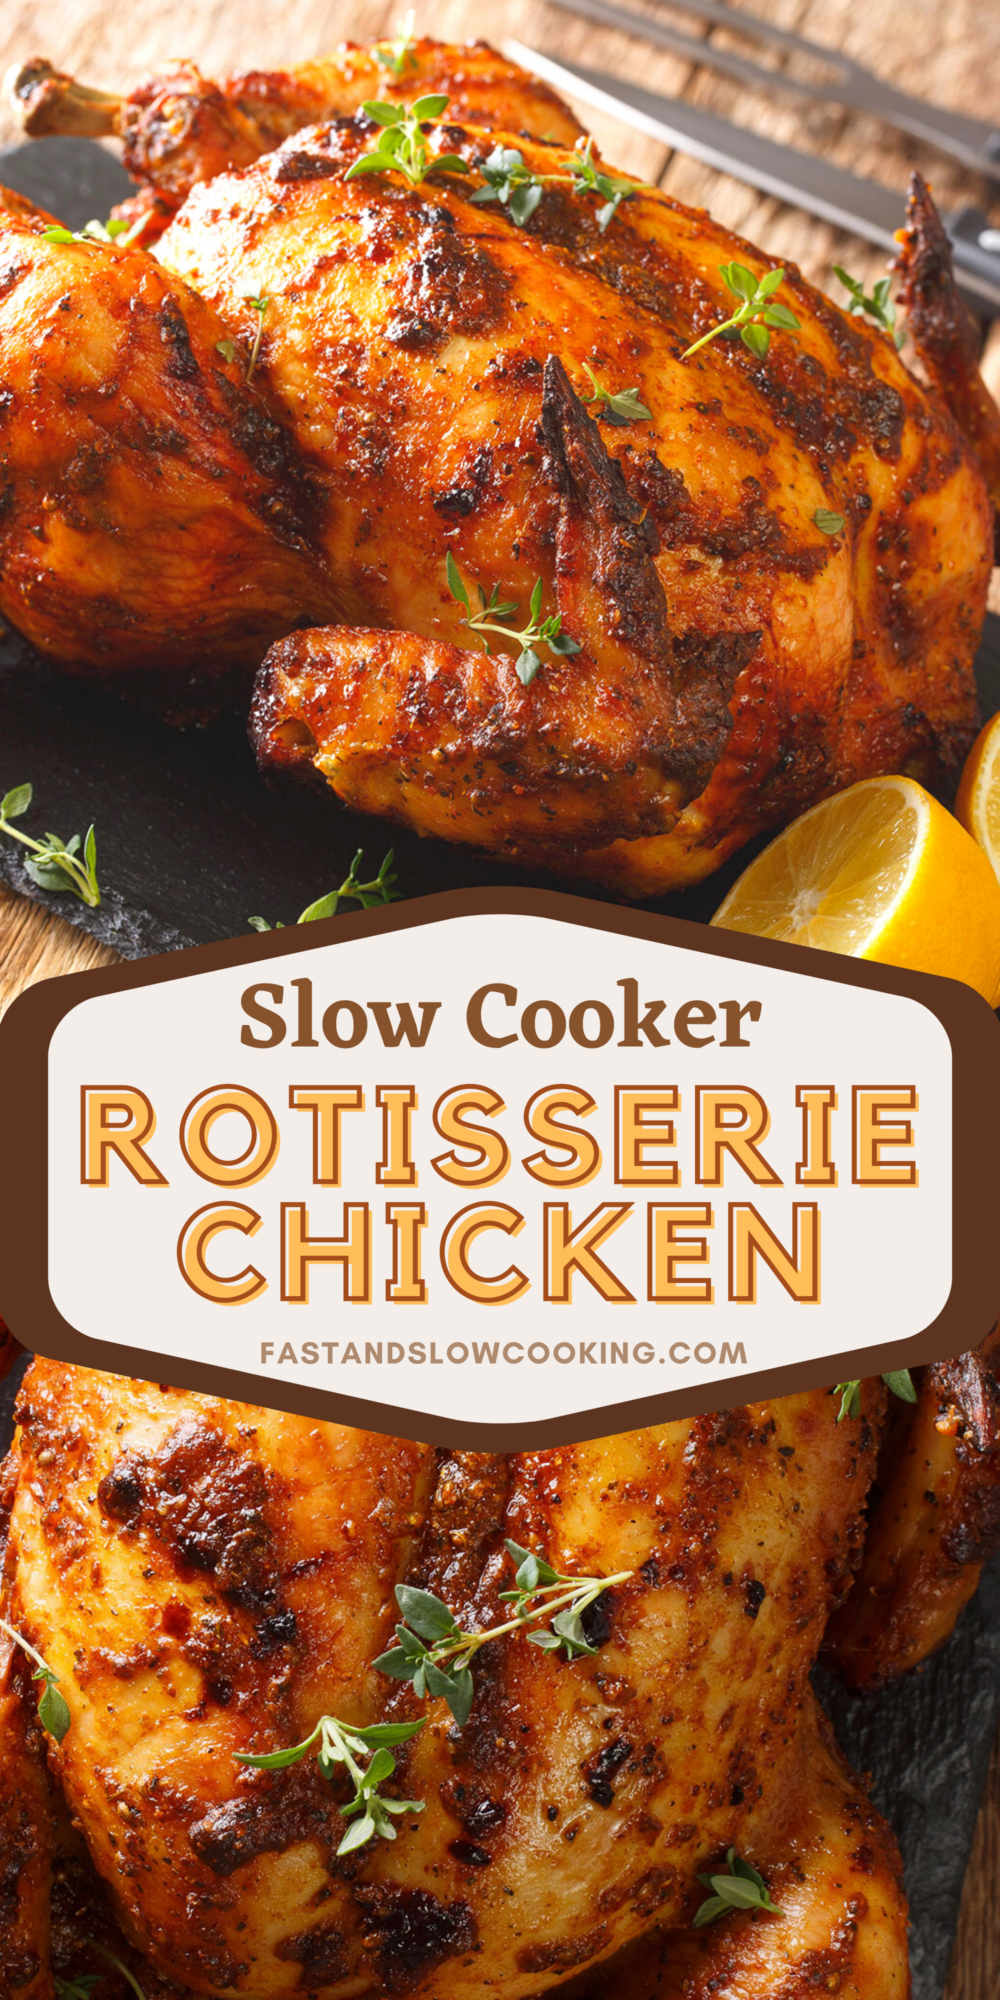 Fall off the bone Crockpot Rotisserie Chicken that is juicy and delicious and the best part is that you can cook it while you are at work and come home to an amazing meal!